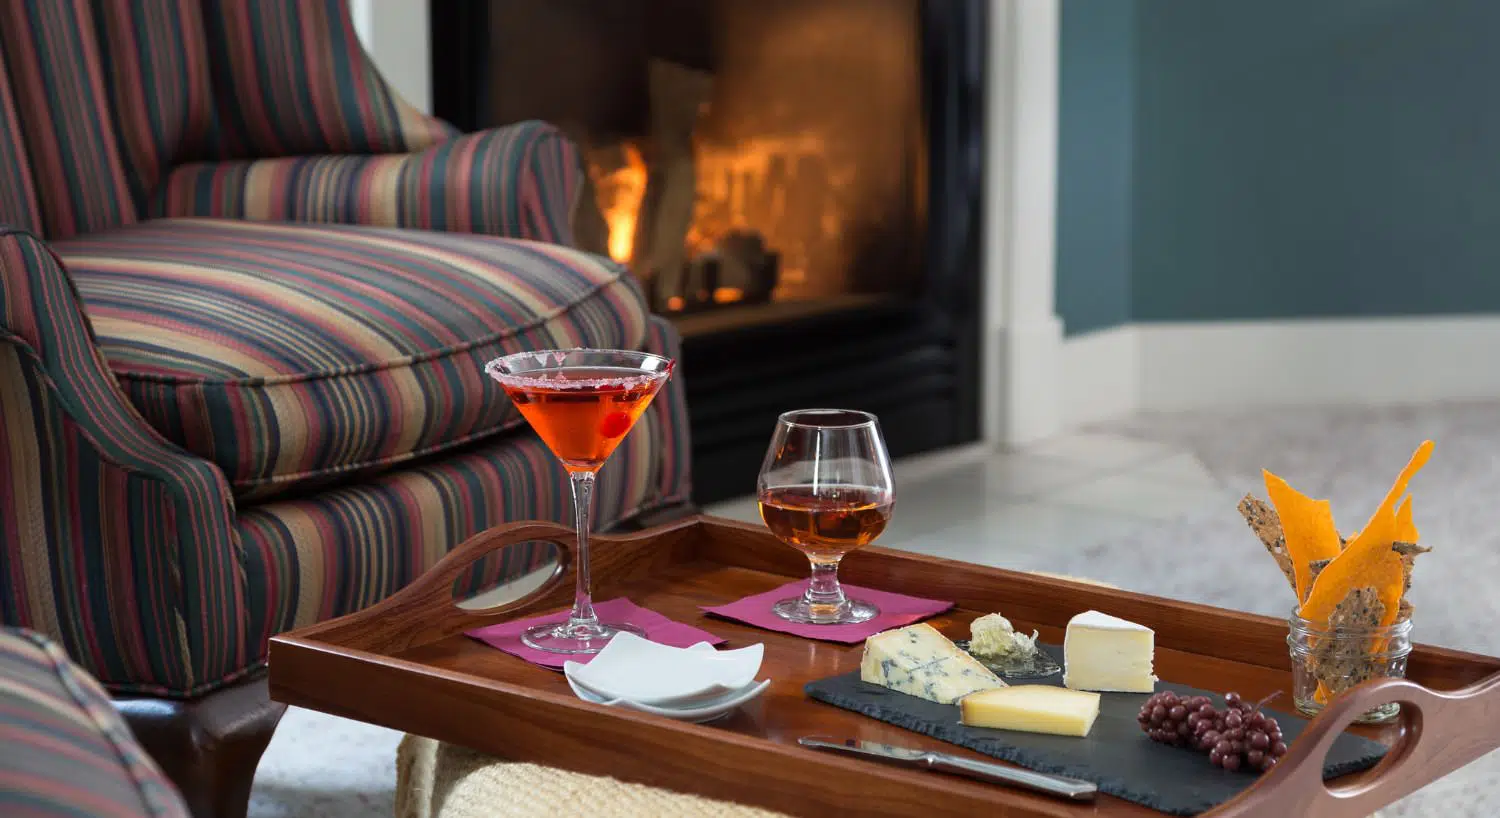 Close up view of wooden tray with cocktails, cheeses, crackers, and fruit next to a striped upholstered arm chair and fireplace